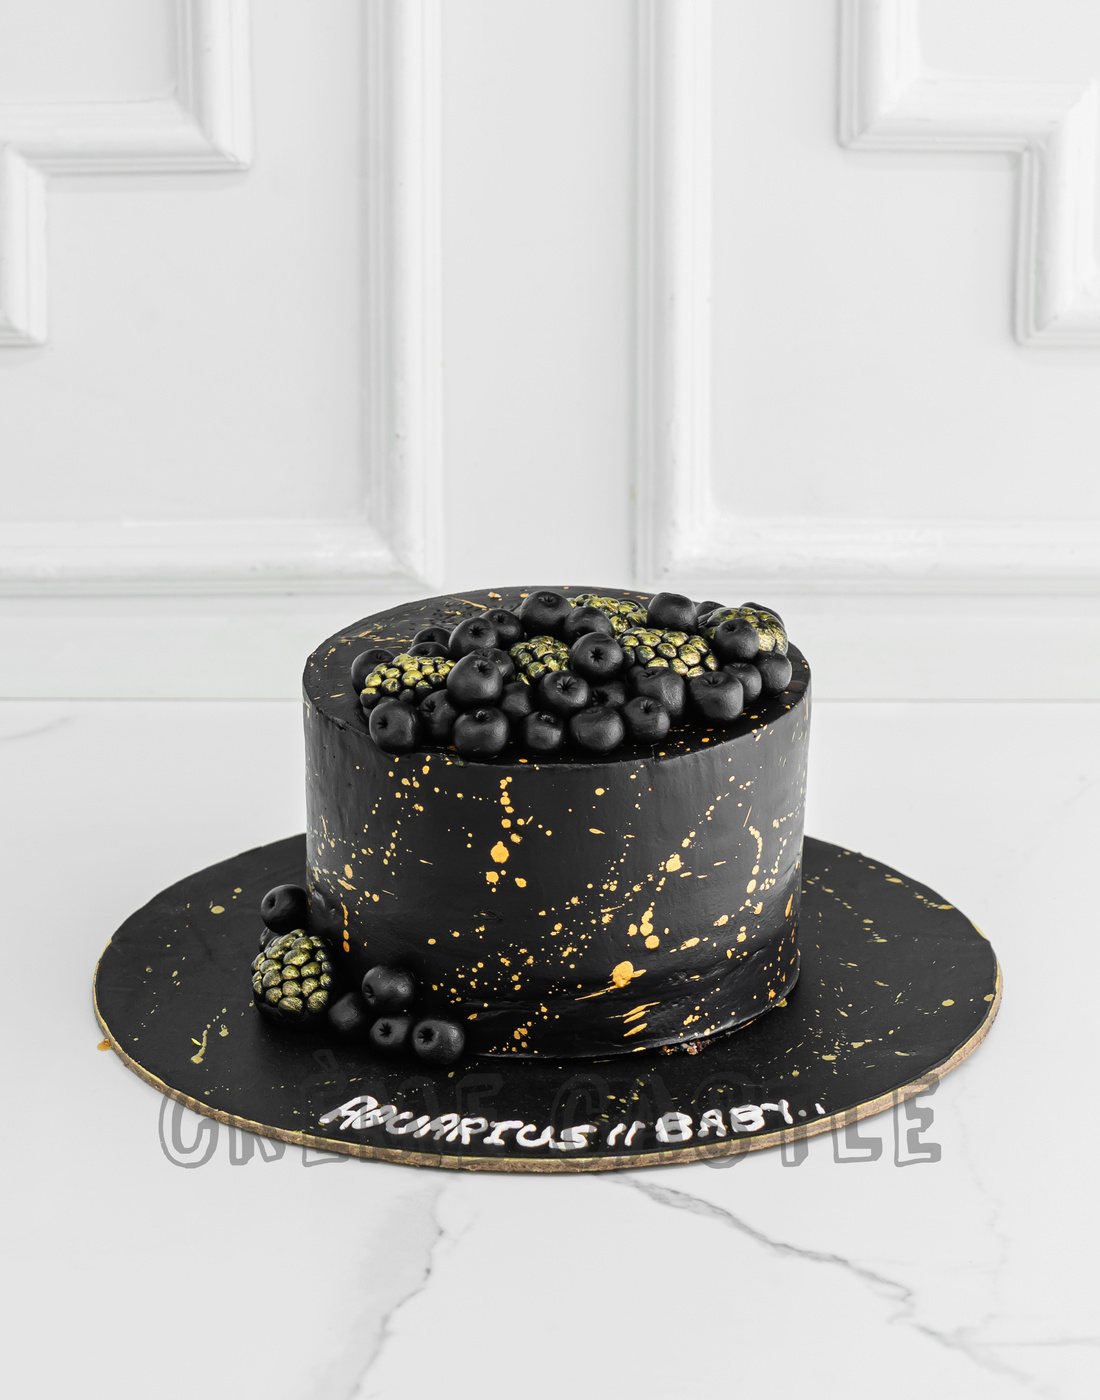 Starry Night' Mousse Cake – Domi